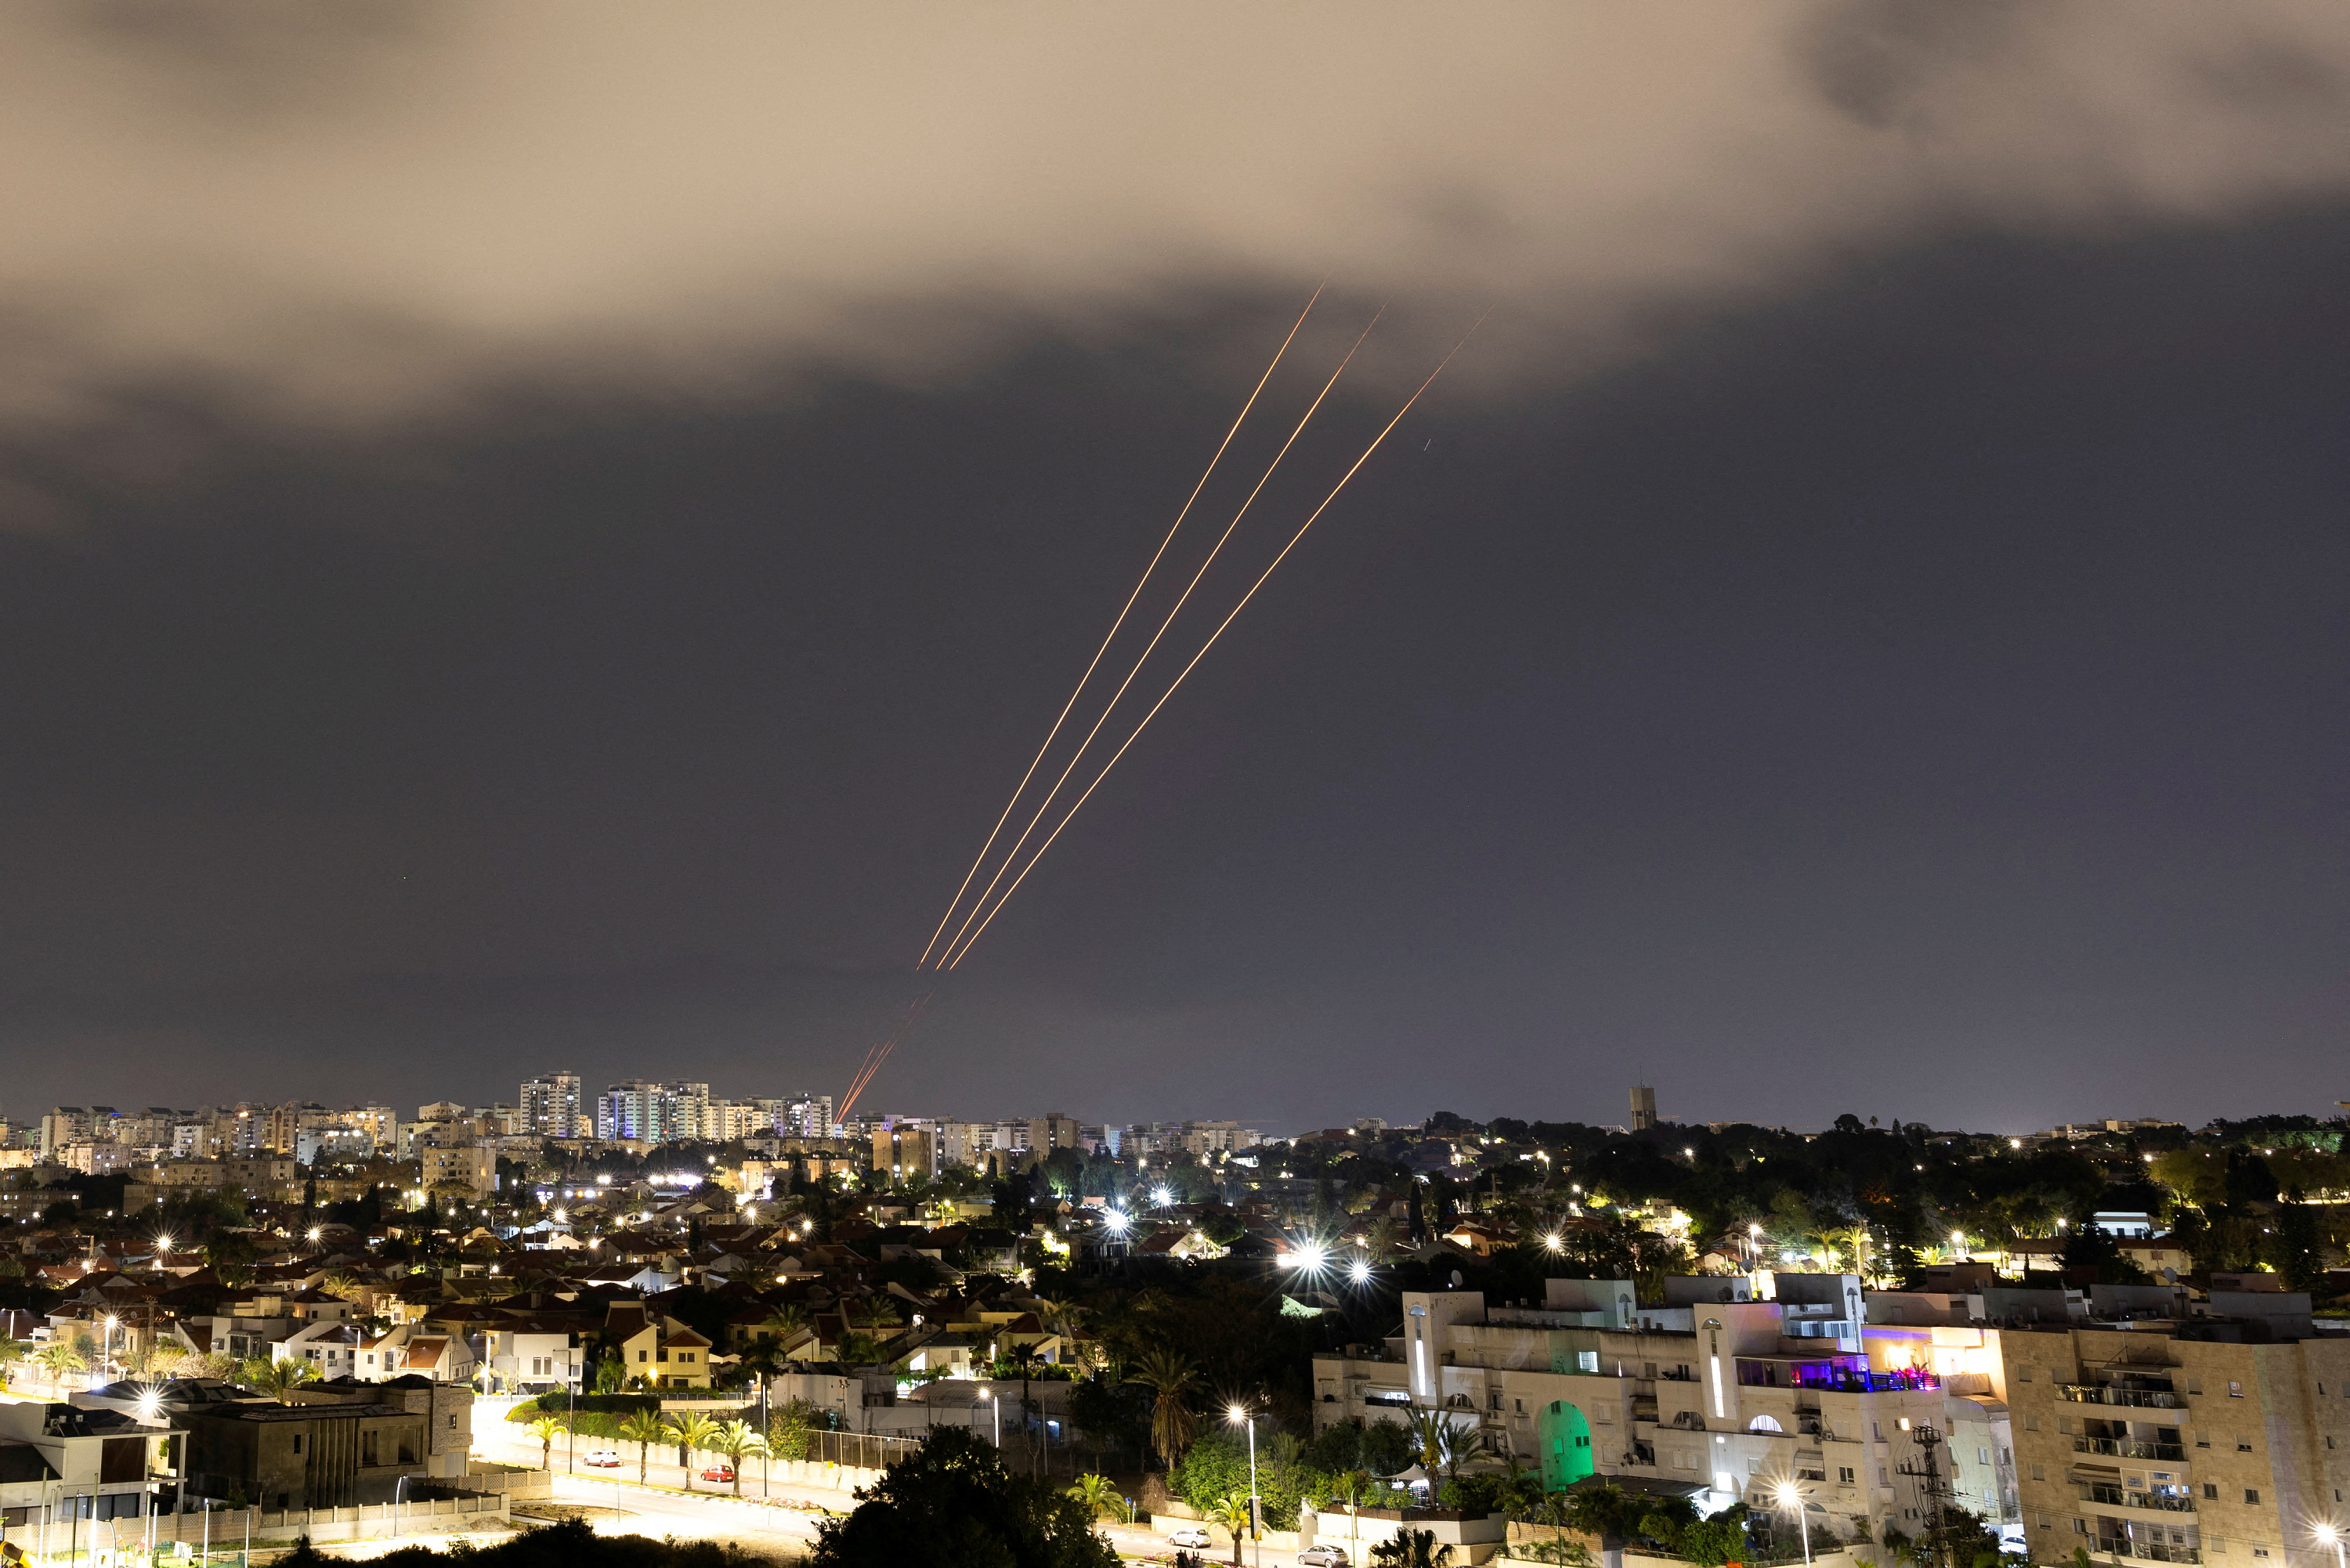 Iran's attack on Israel: missiles intercepted above the Knesset and the Dome of the Rock, holiest site of Islam